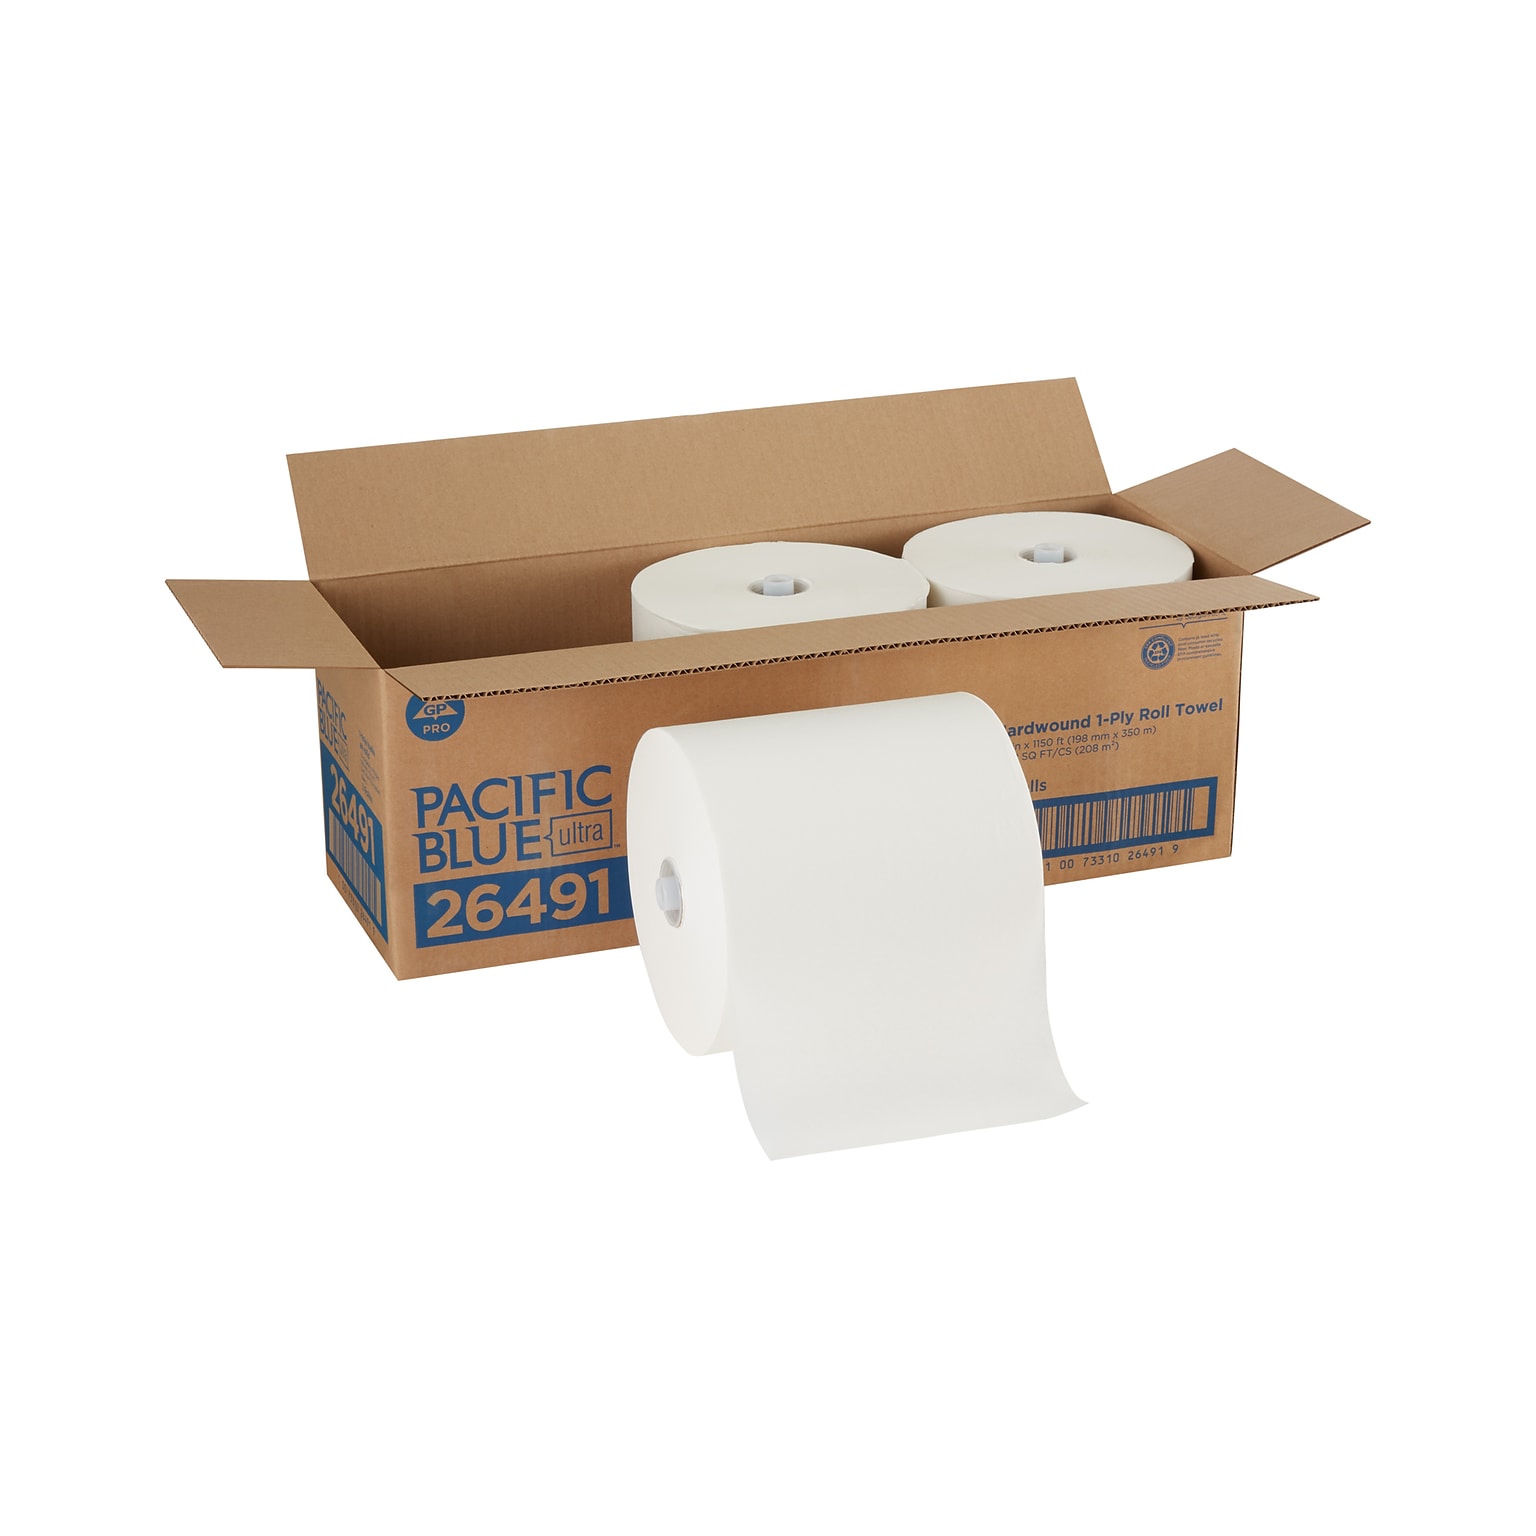 Pacific Blue Ultra 8 High-Capacity Hardwound Paper Towels, 1-Ply, 3 Rolls/Carton (26491)